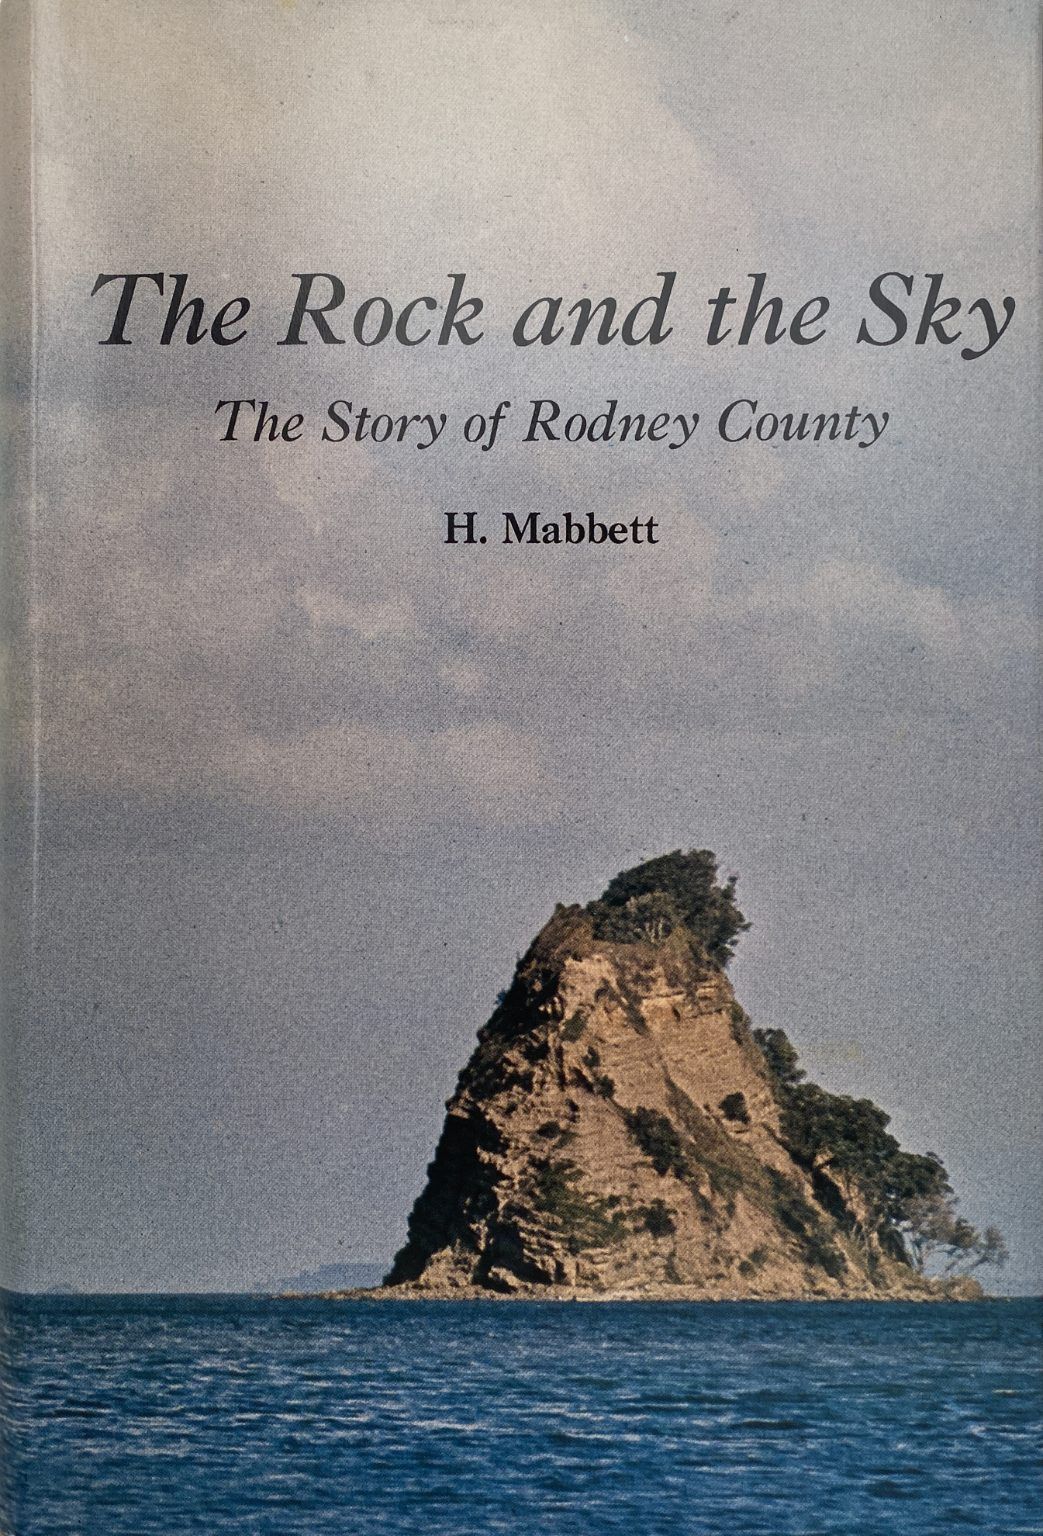 THE ROCK AND THE SKY: The Story of Rodney County